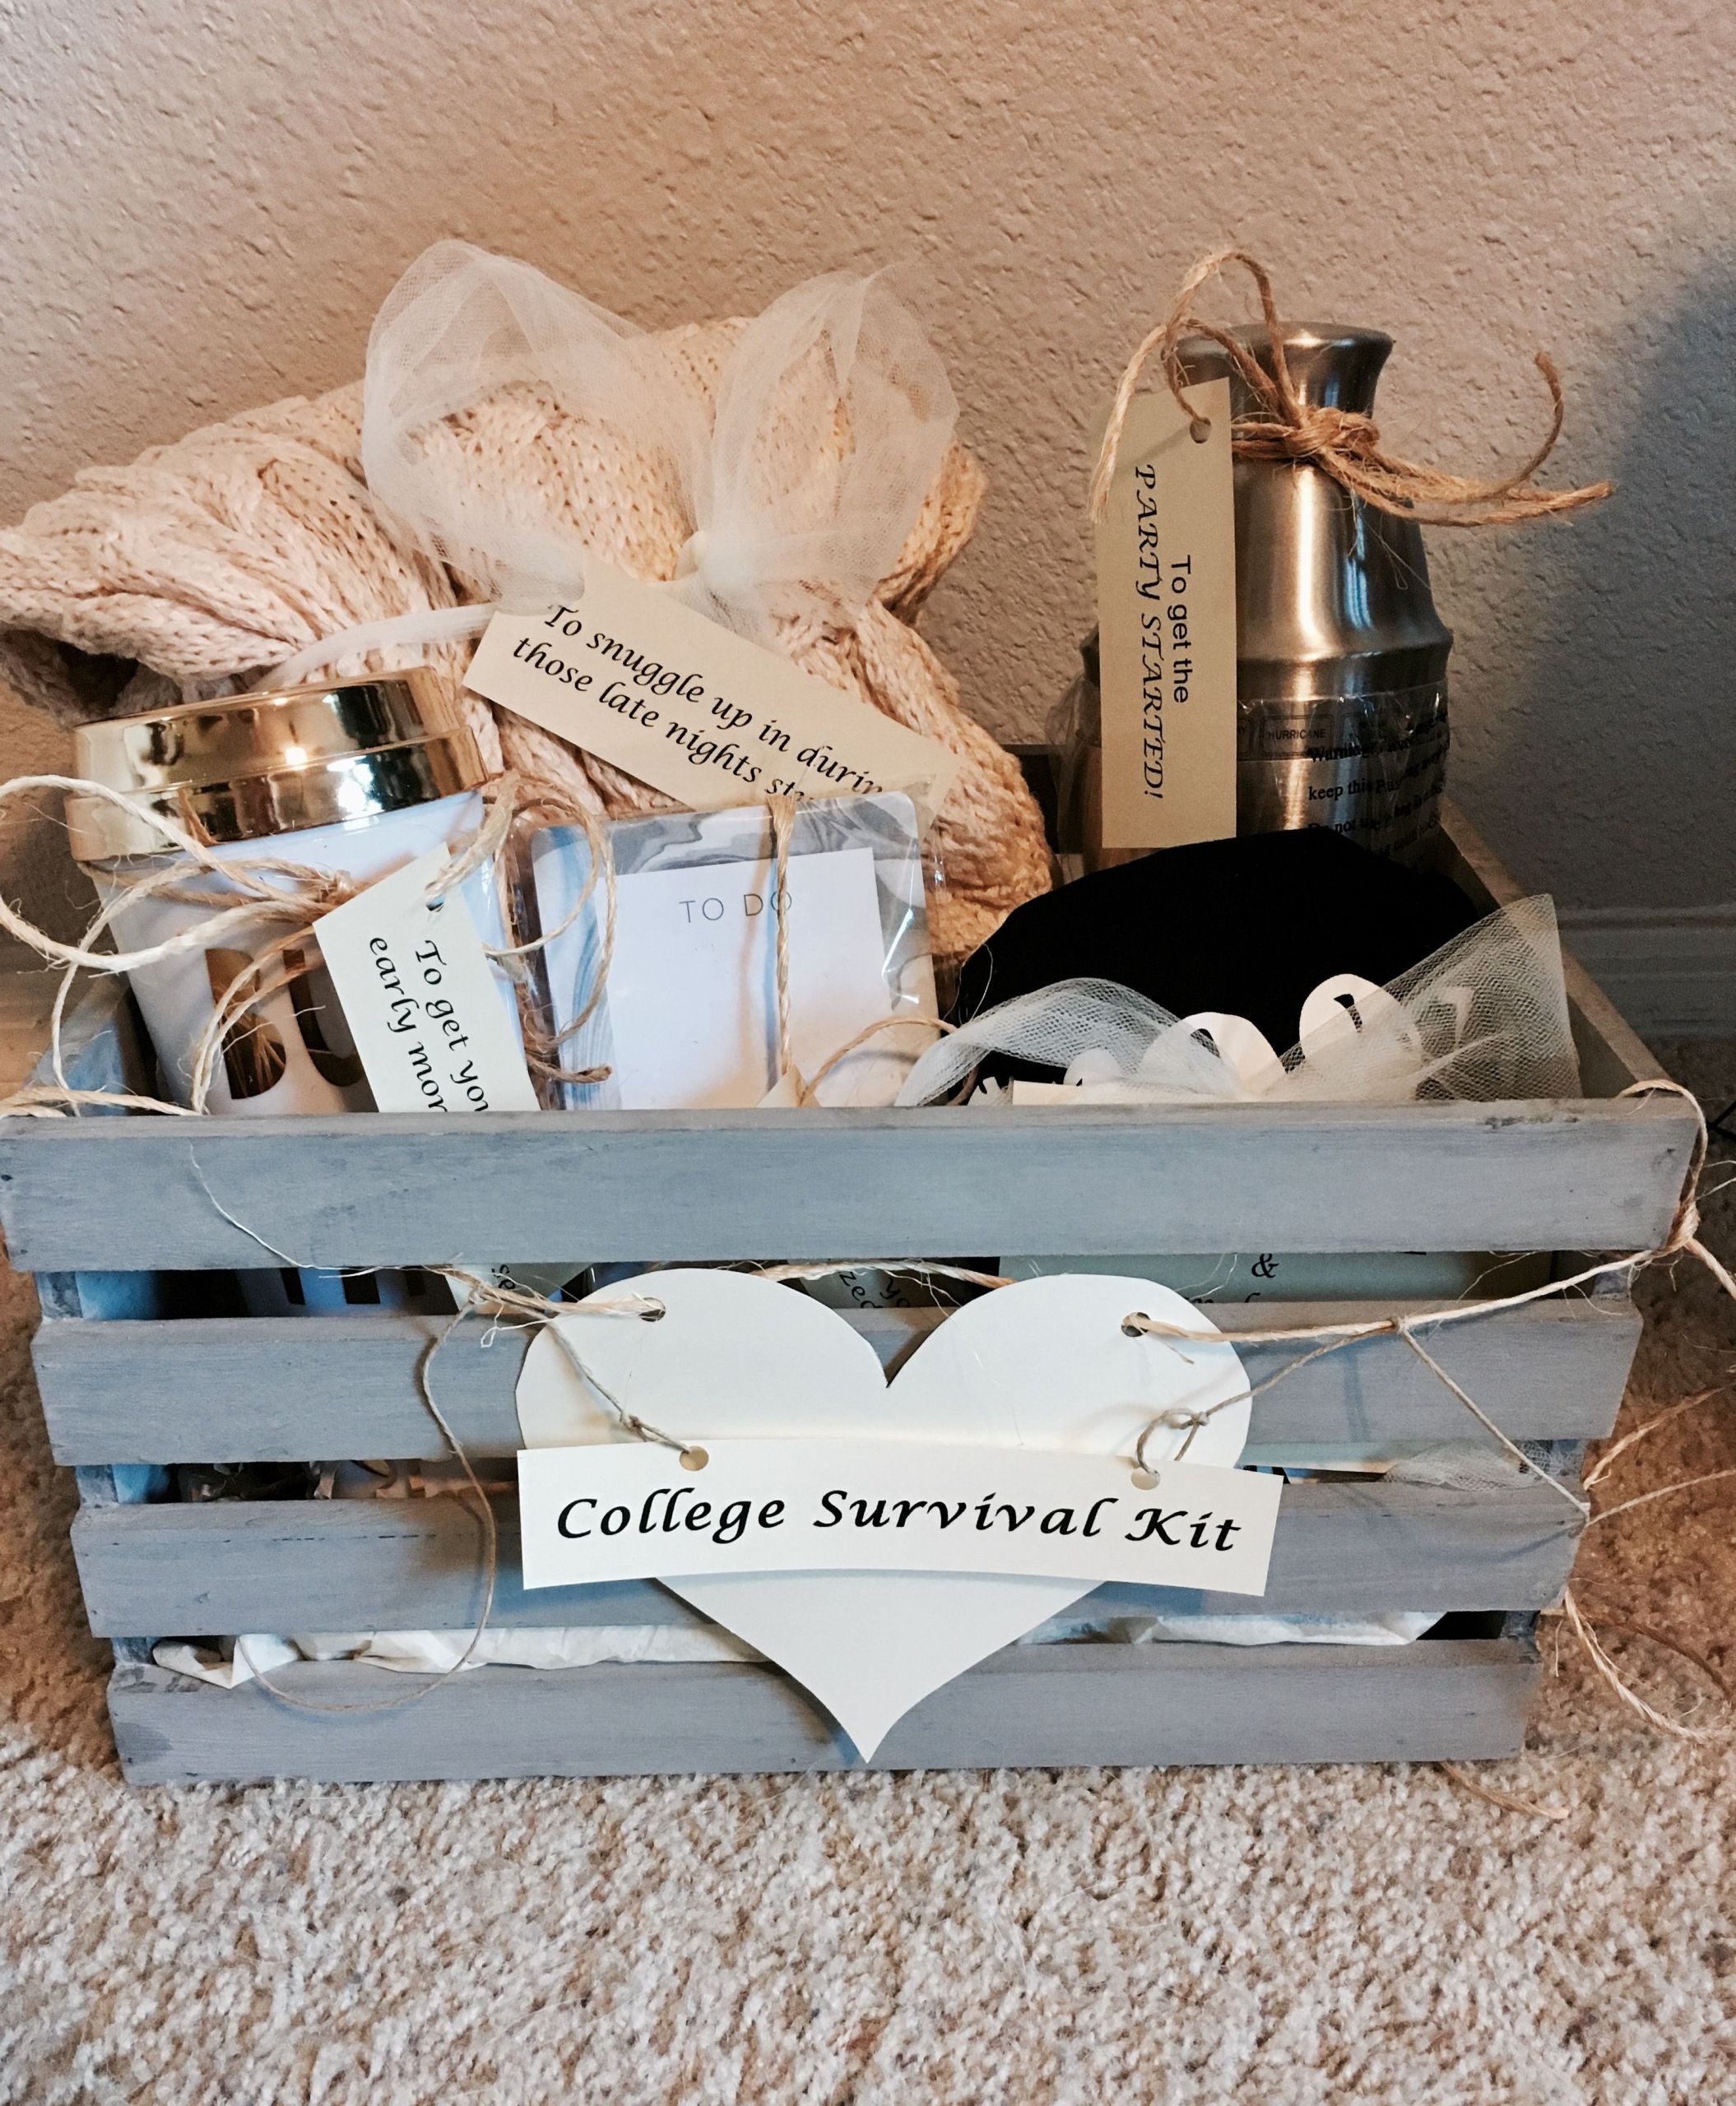 College Graduation Gift Ideas For Sister
 "College Survival Kit" High School graduation t for my